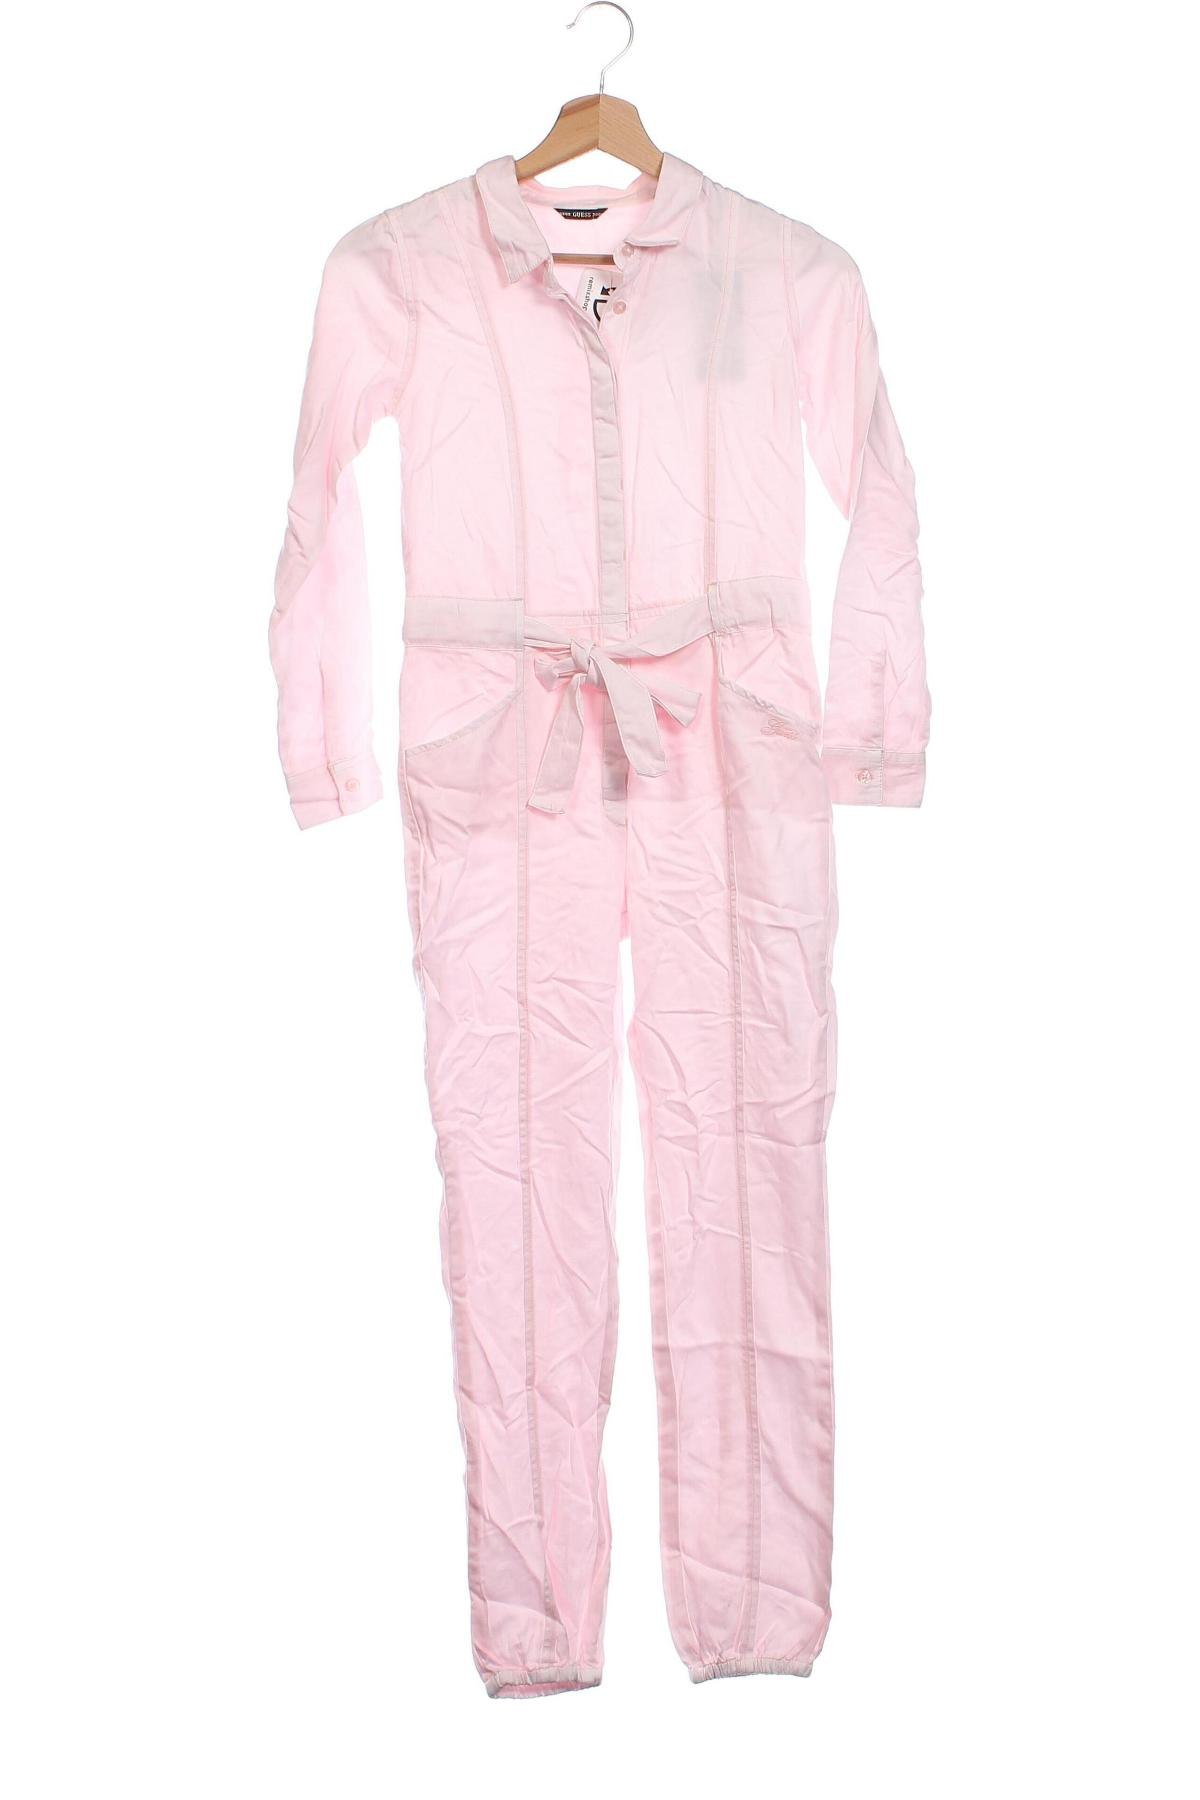 Kinder Overall Guess, Größe 7-8y/ 128-134 cm, Farbe Rosa, Preis € 27,60